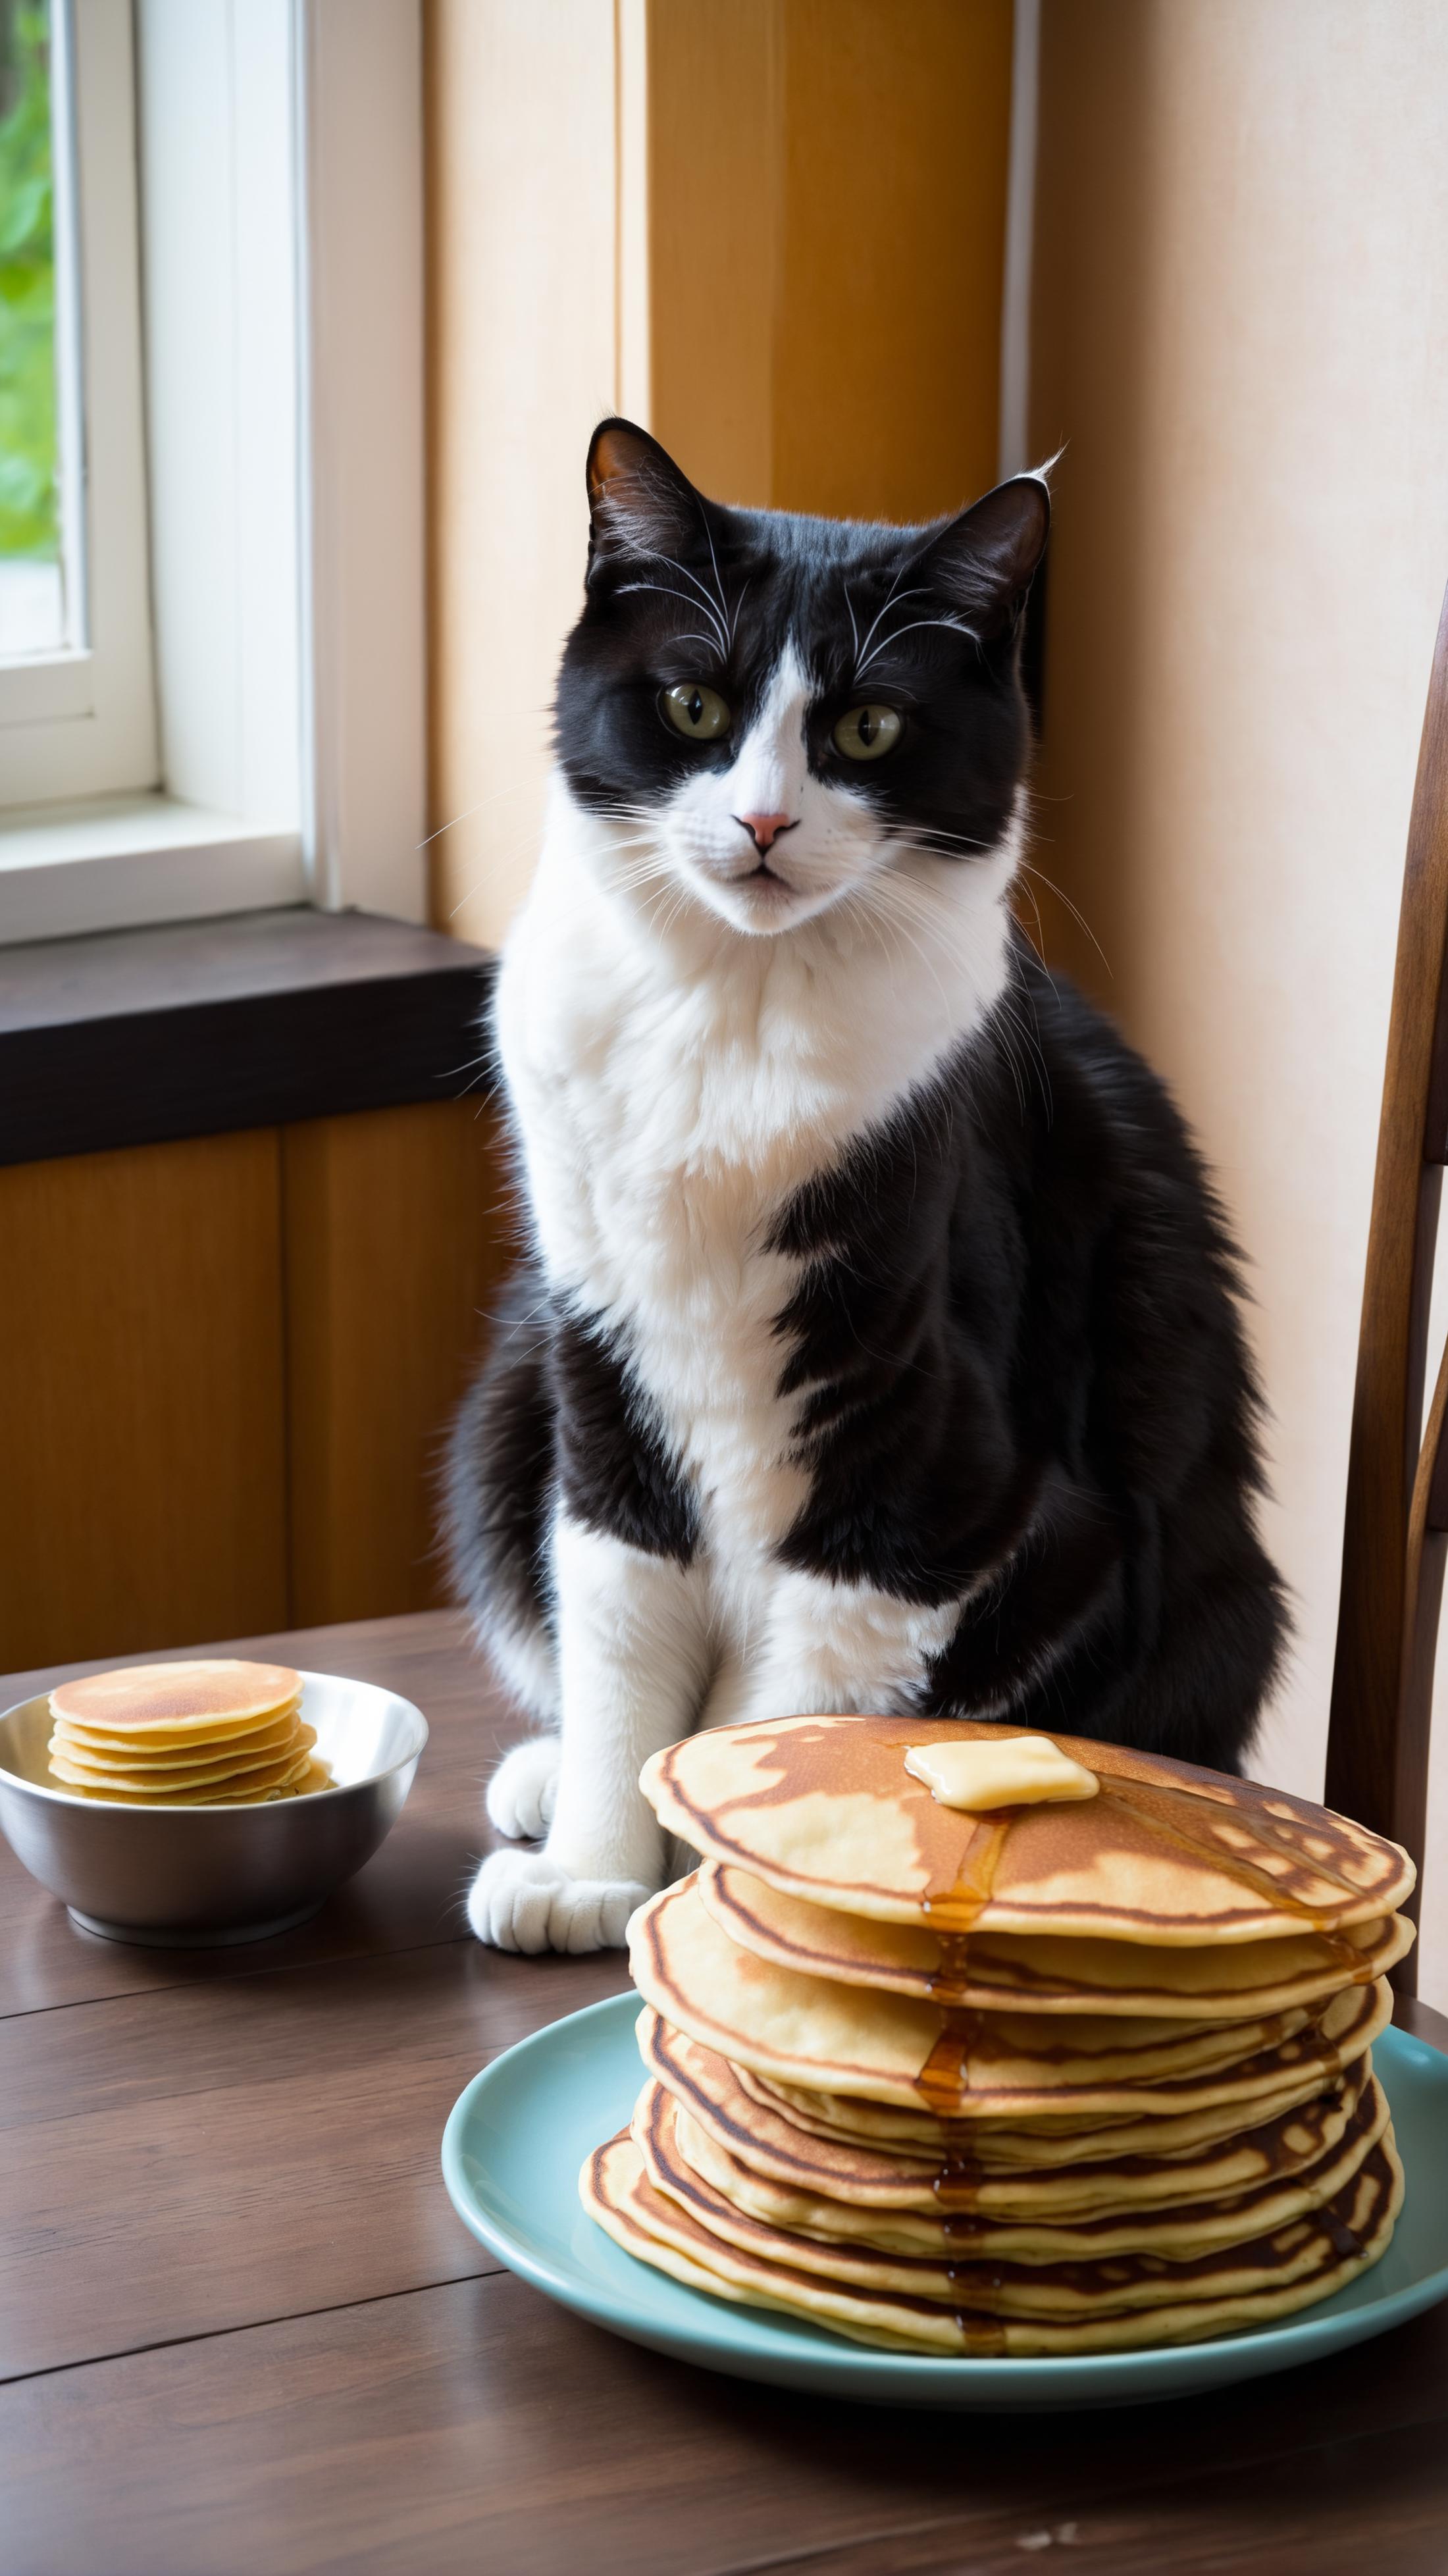 A black and white cat sitting on a table next to a stack of pancakes.